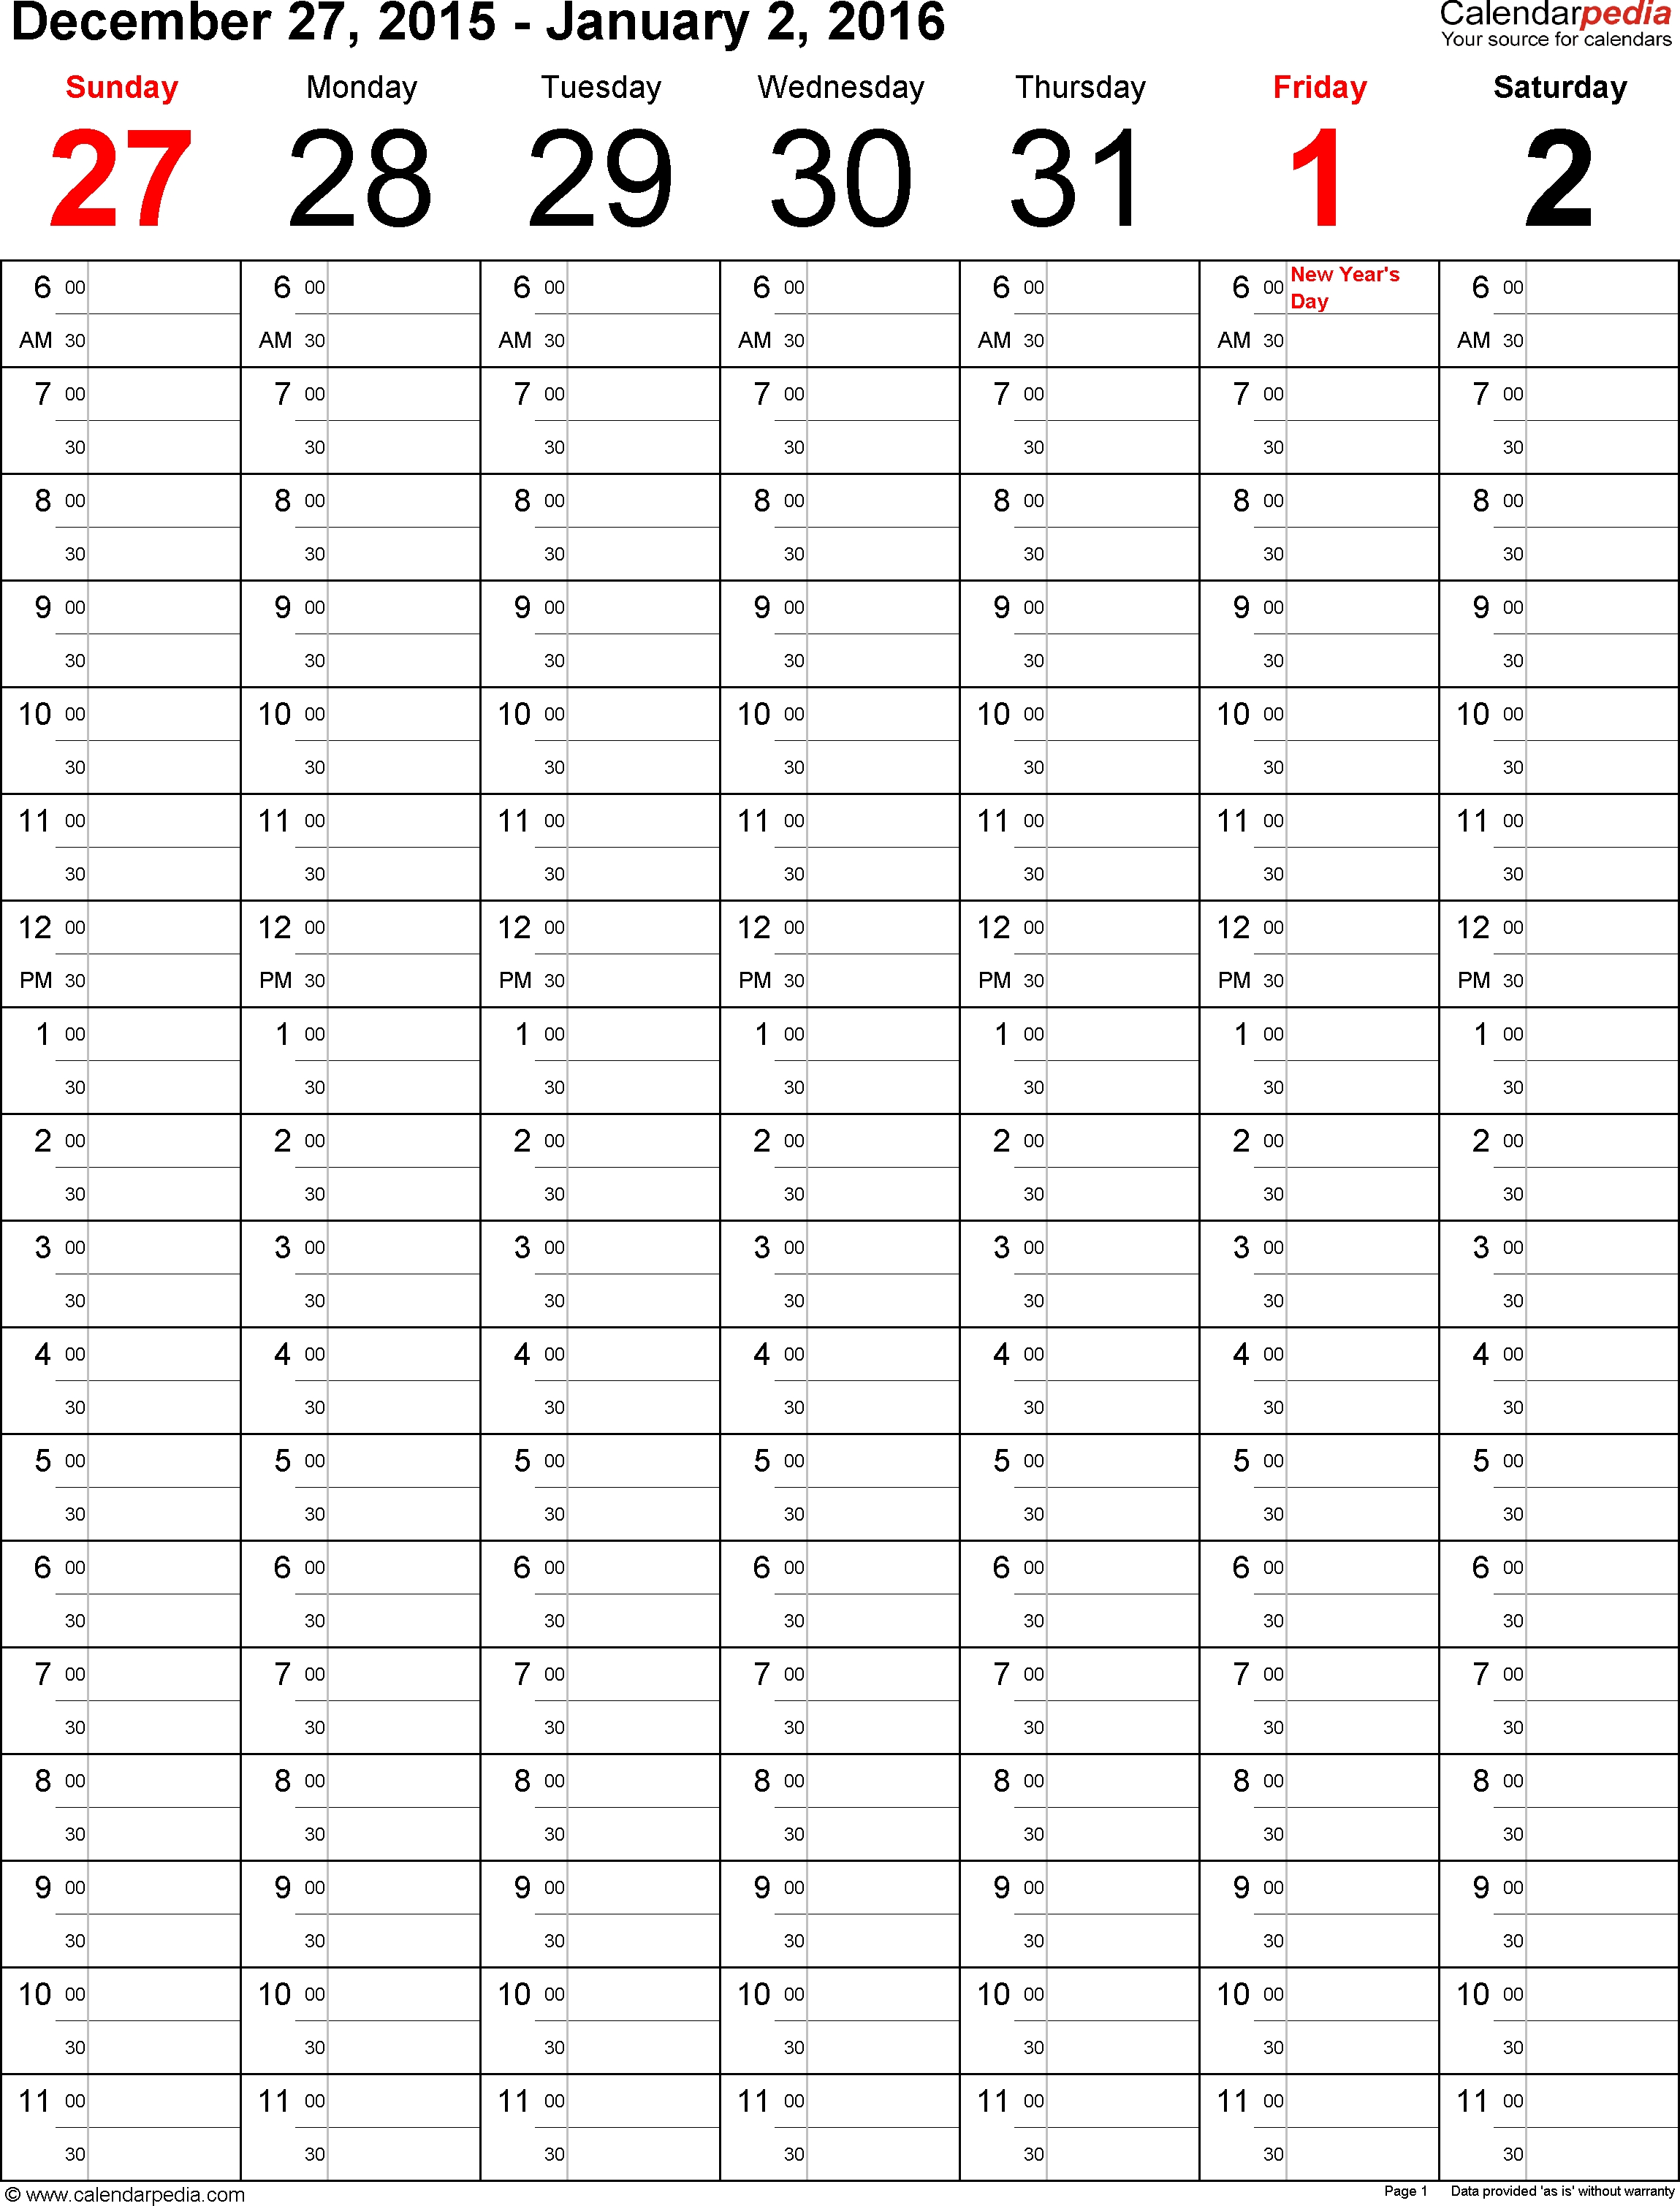 Weekly Calendars 2016 For Excel - 12 Free Printable Templates